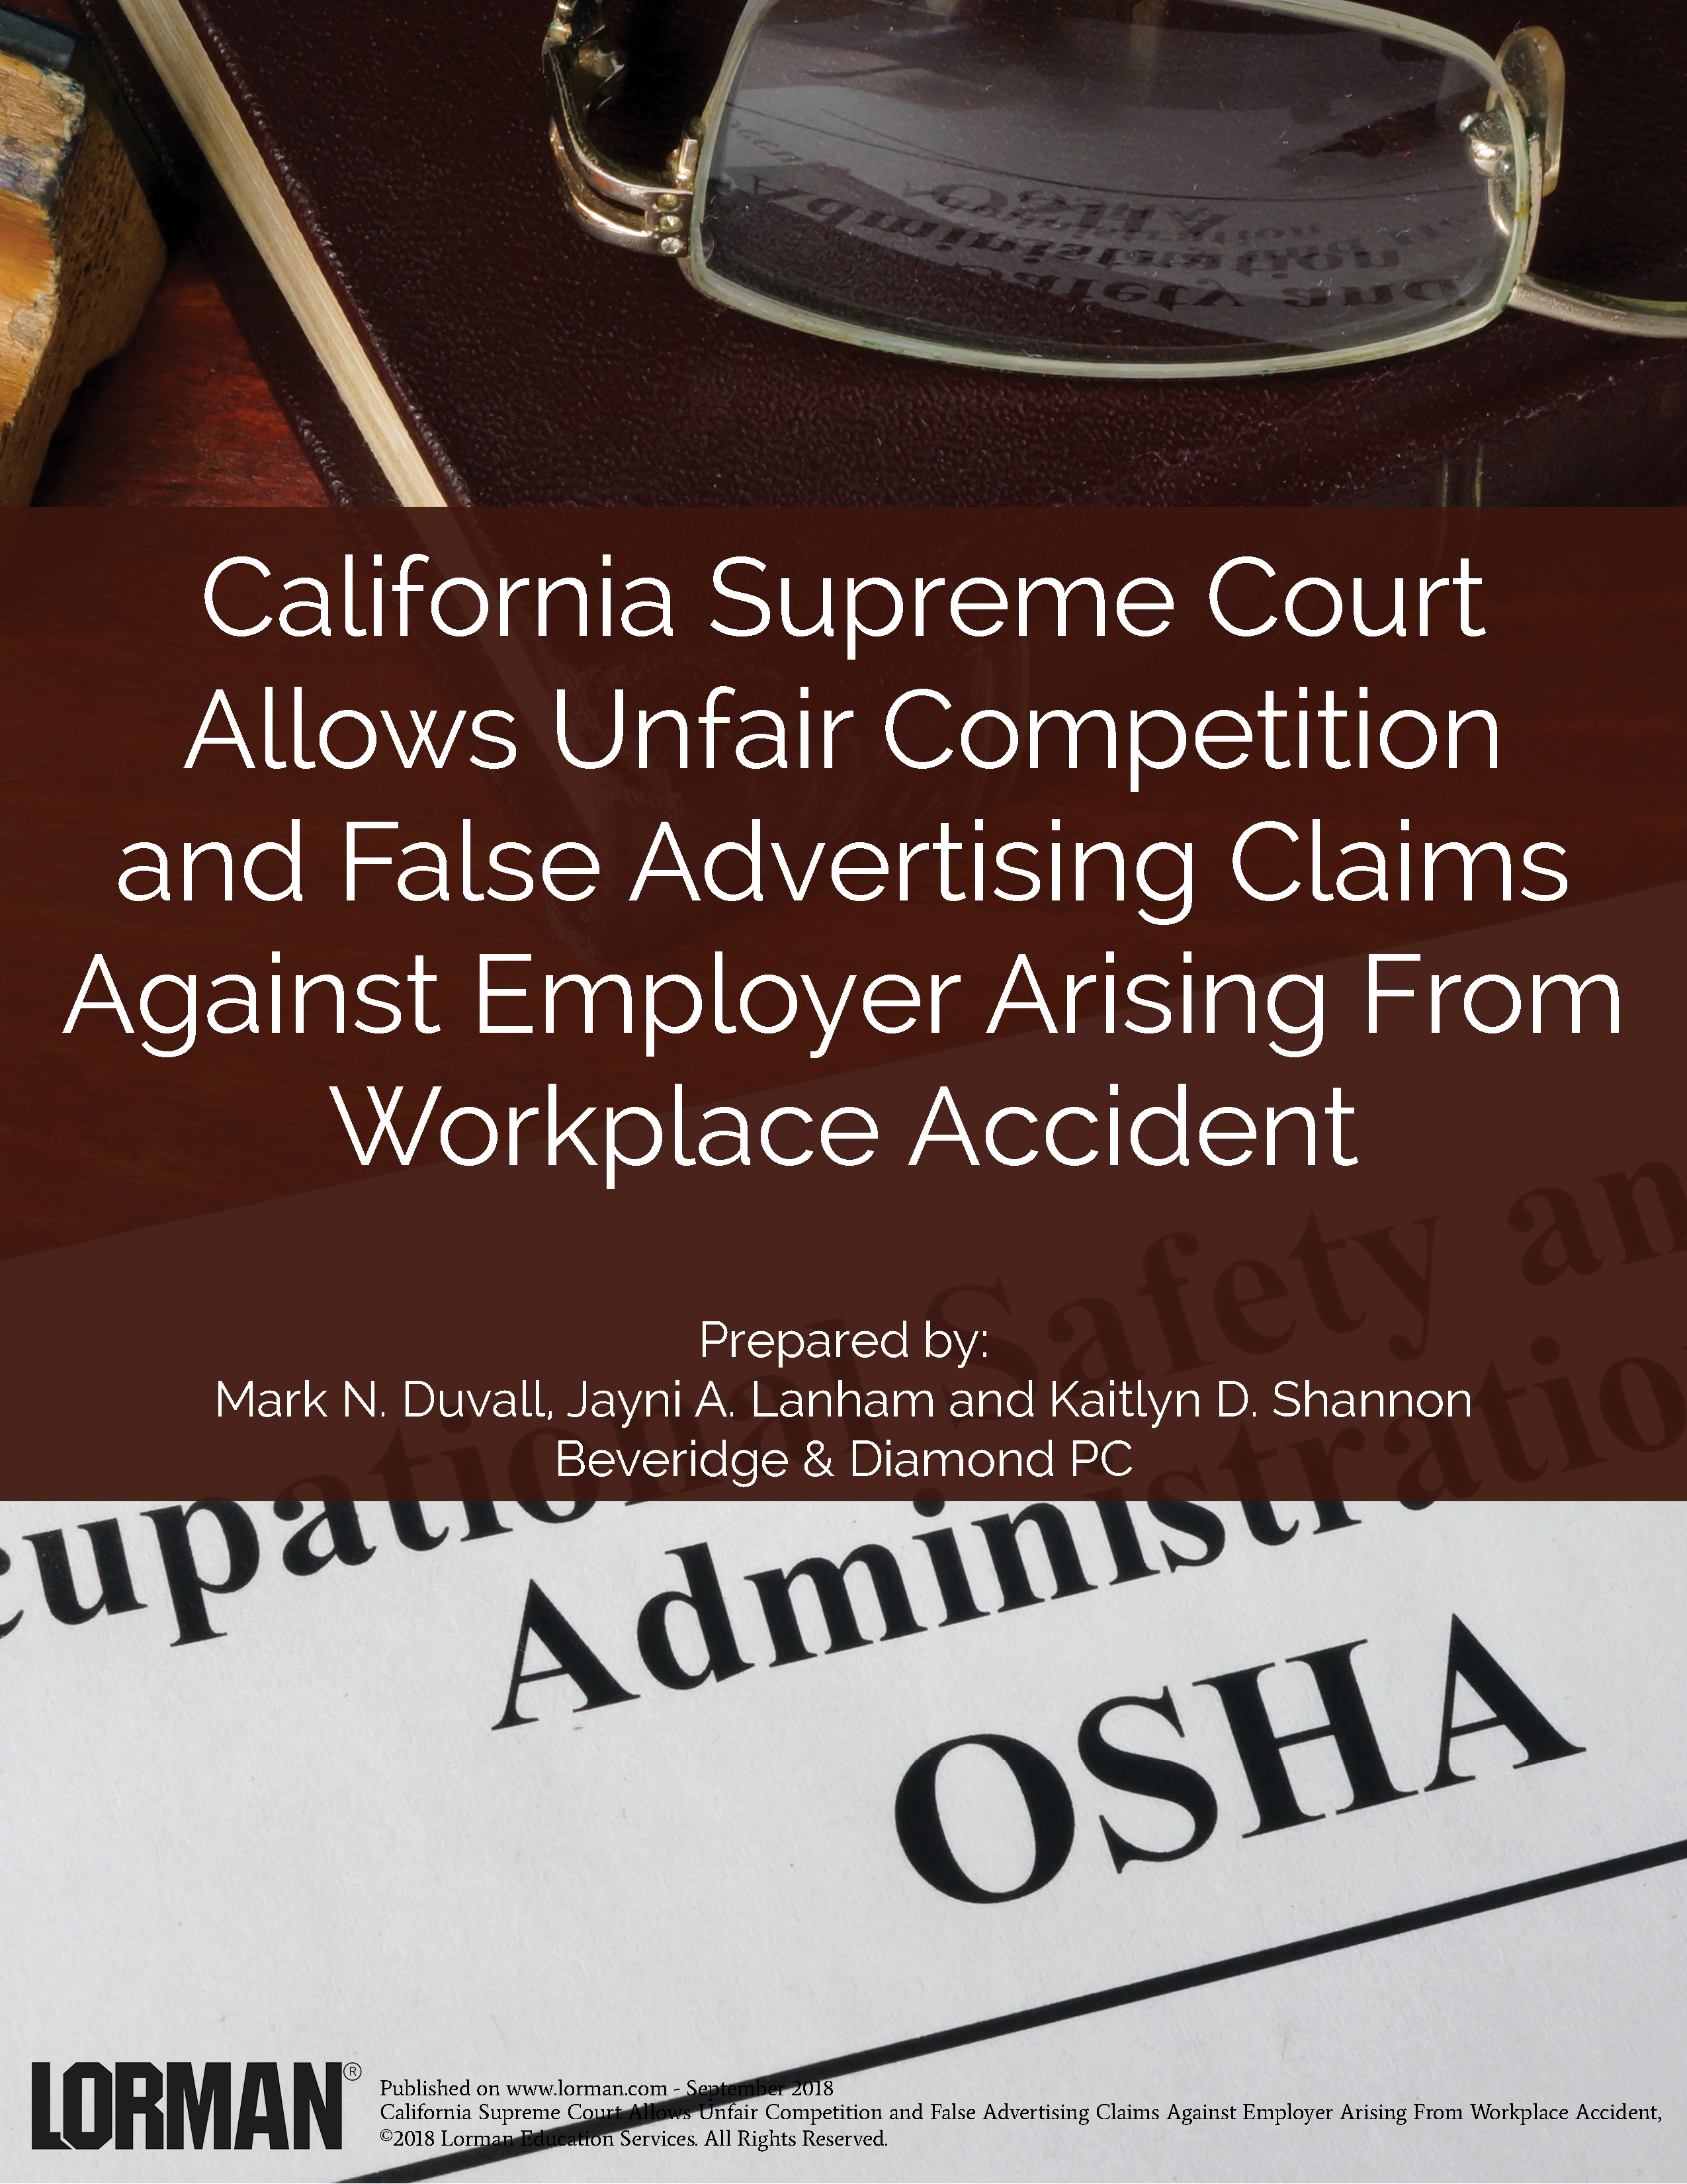 CA Supreme Court Allows Unfair Competition and False Advertising Claims From Workplace Accident